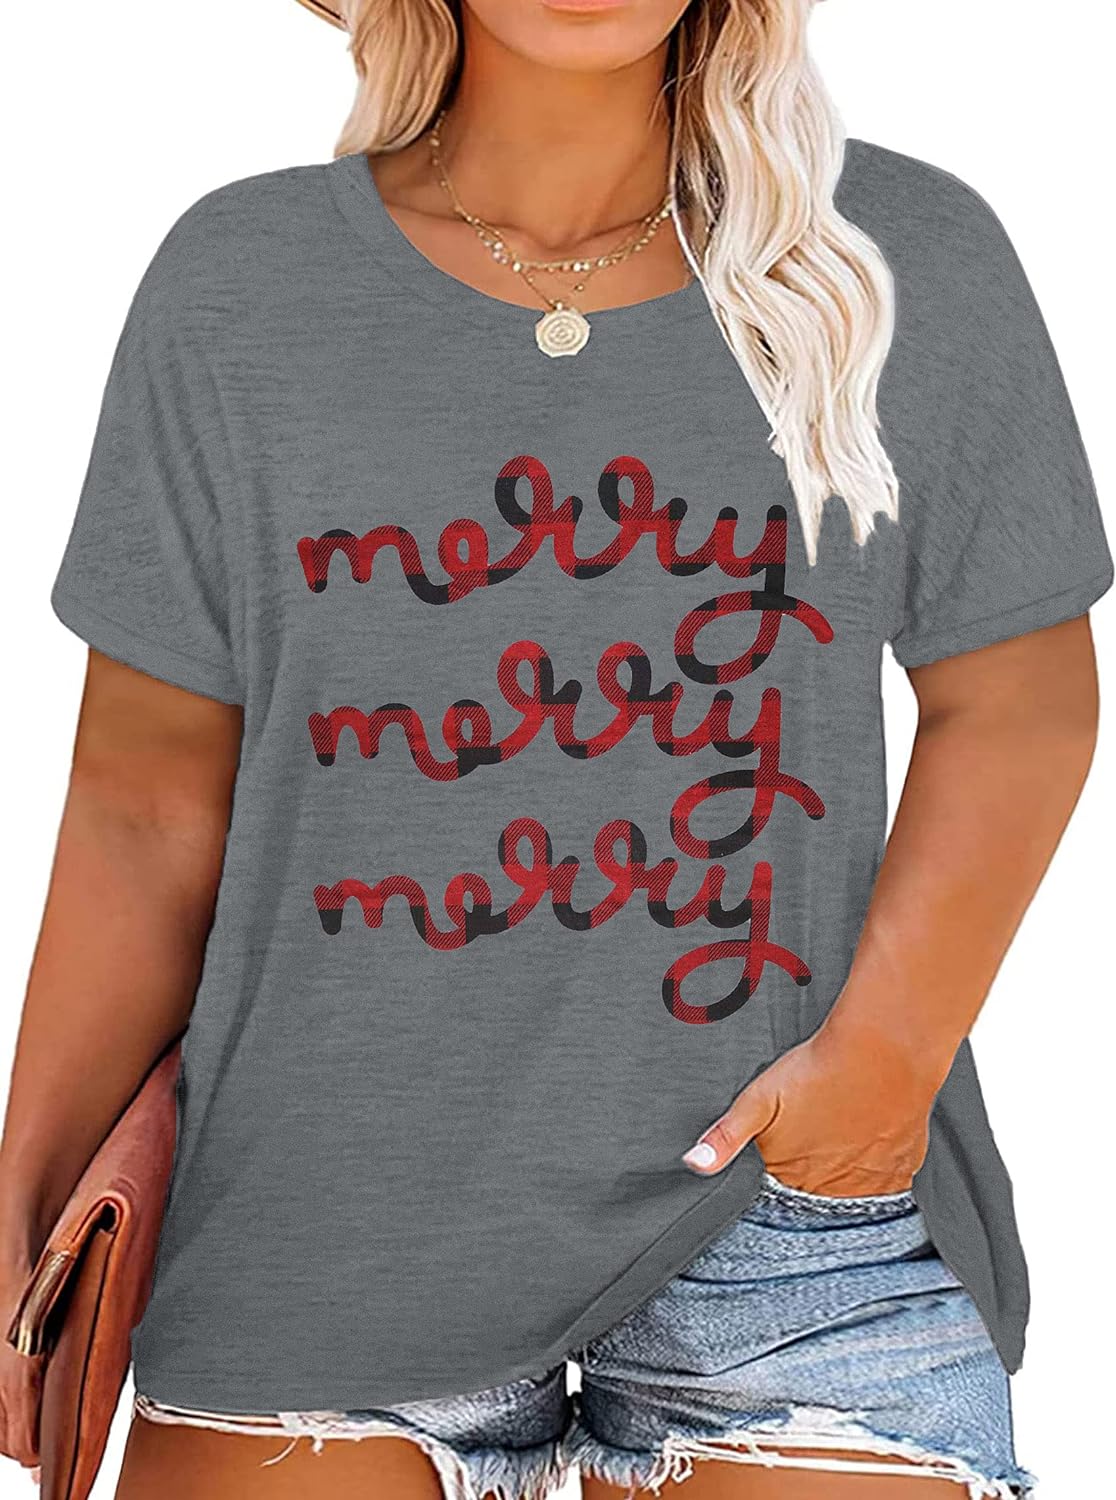 Celebrate the Festive Season with Christmas Plus Size Shirt Women Merry and Bright Tops